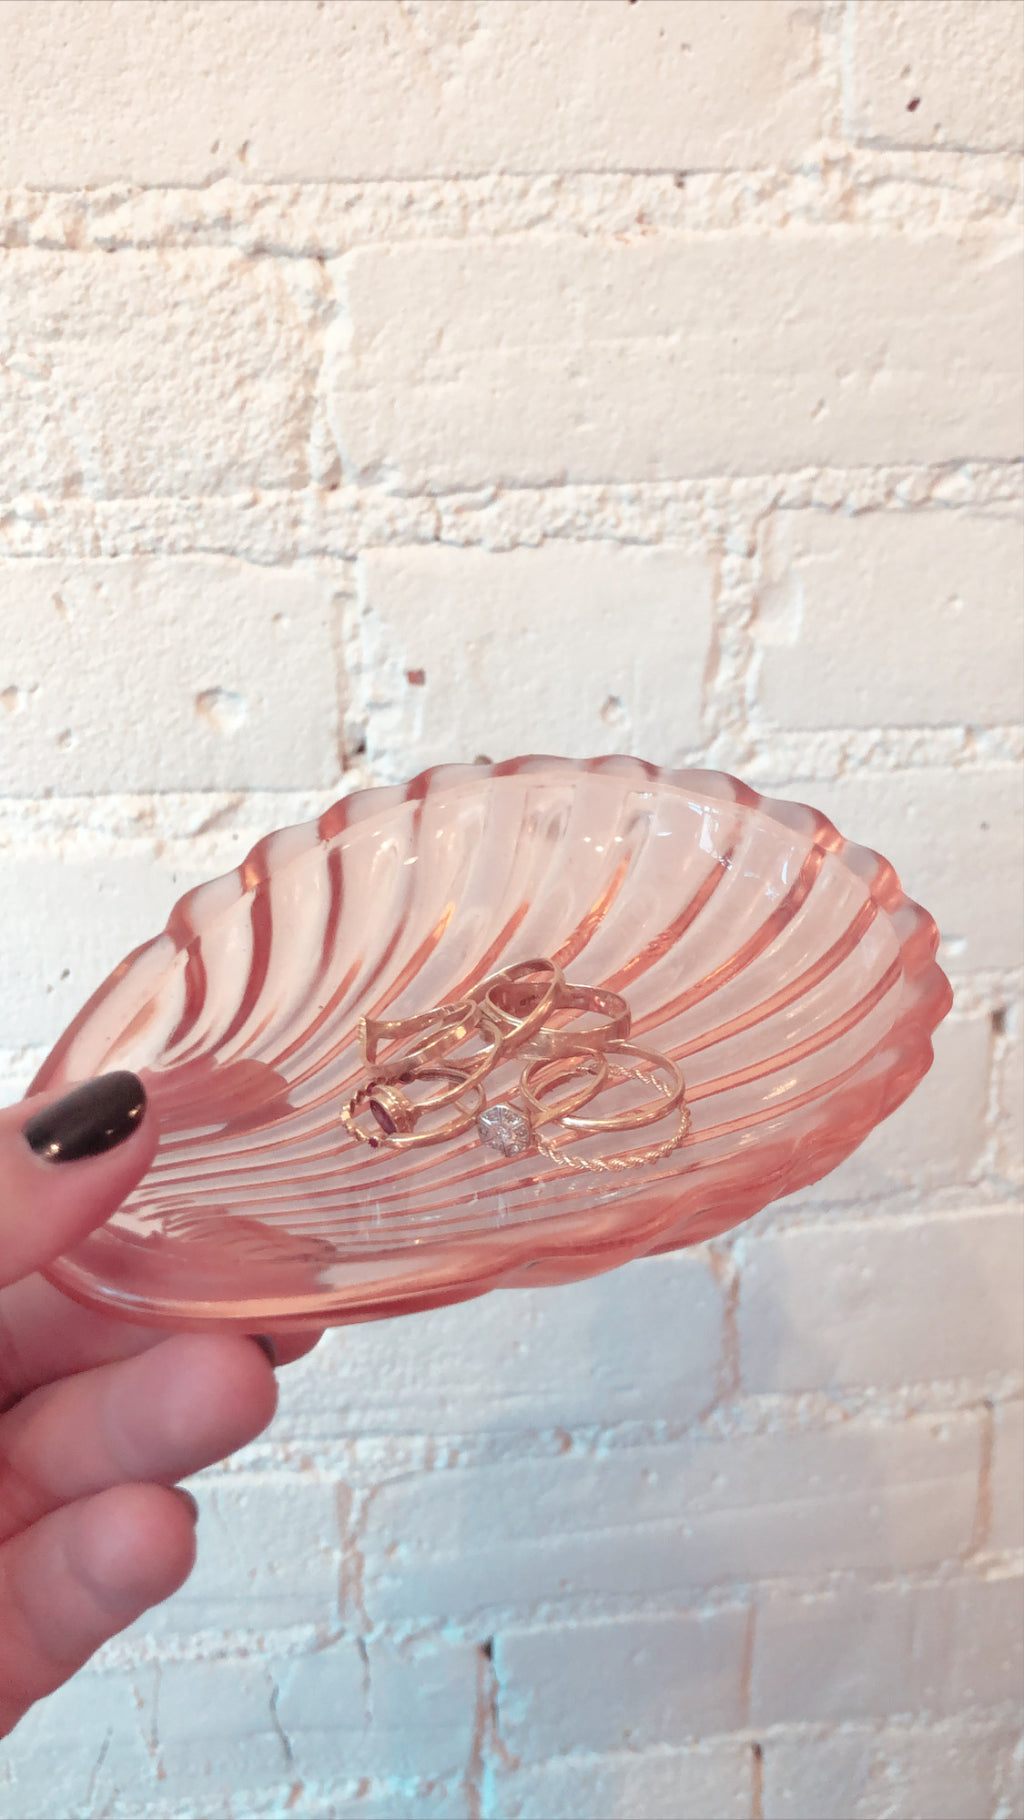 Seashell Dishes - Pink